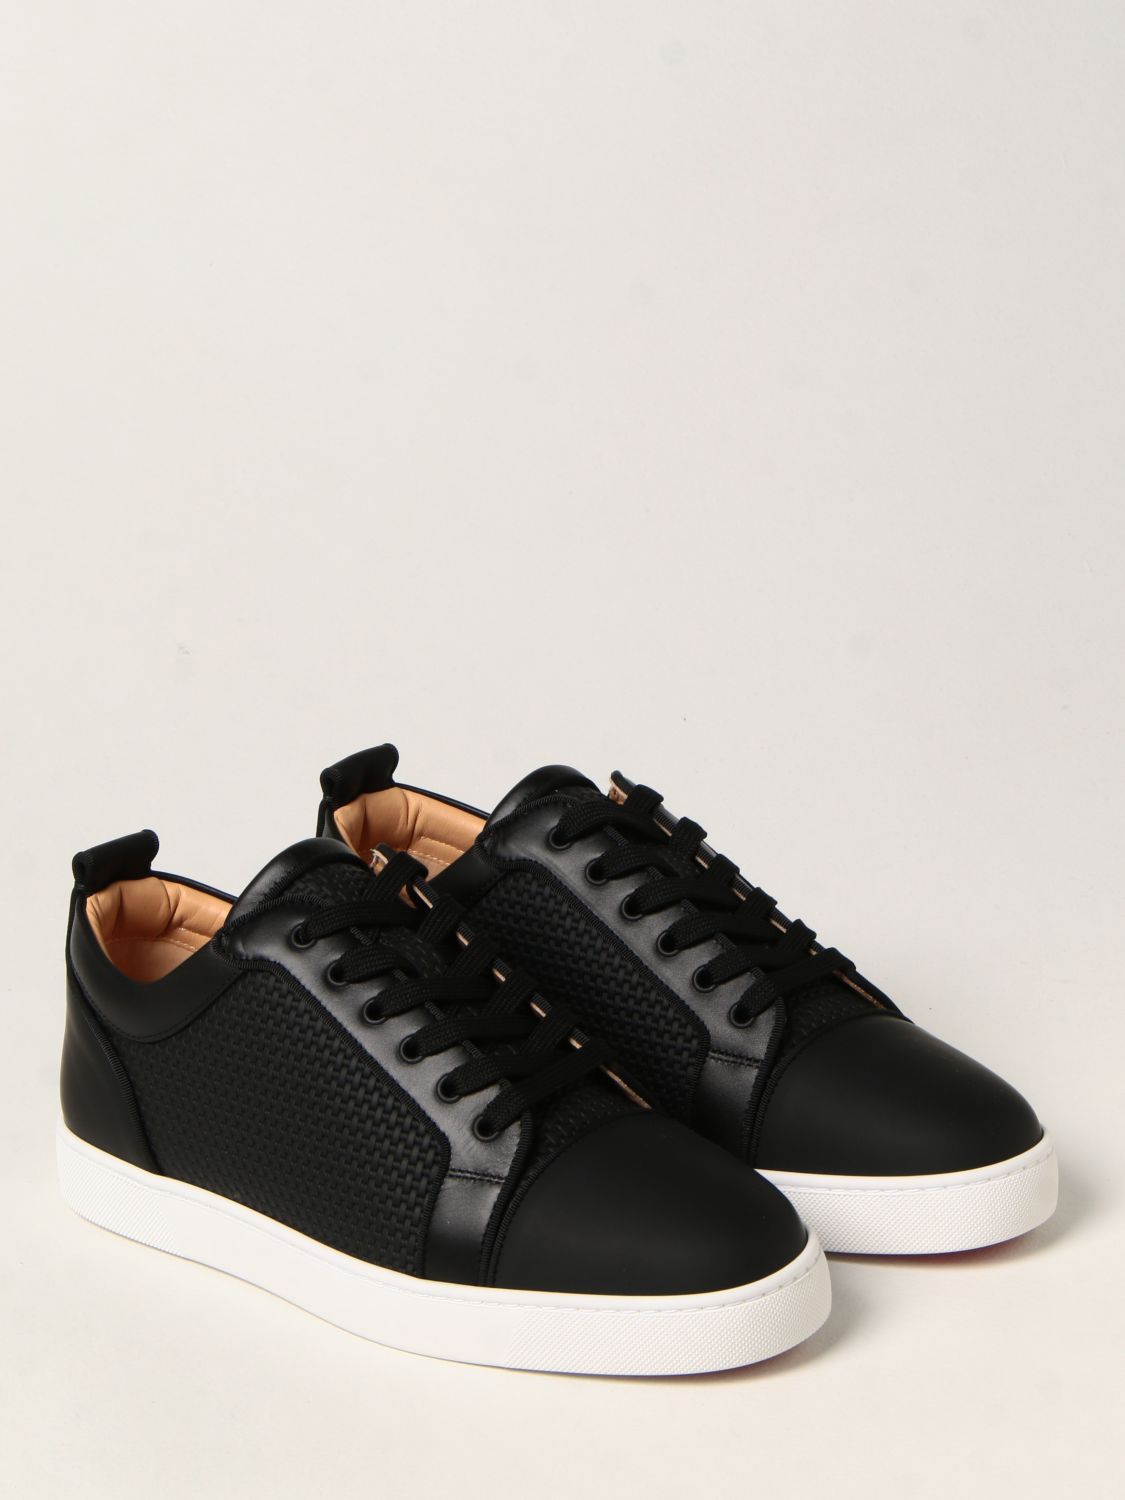 CHRISTIAN LOUBOUTIN: Chaussures homme | Baskets Christian Louboutin Homme  Noir | Baskets Christian Louboutin 1220234 GIGLIO.COM